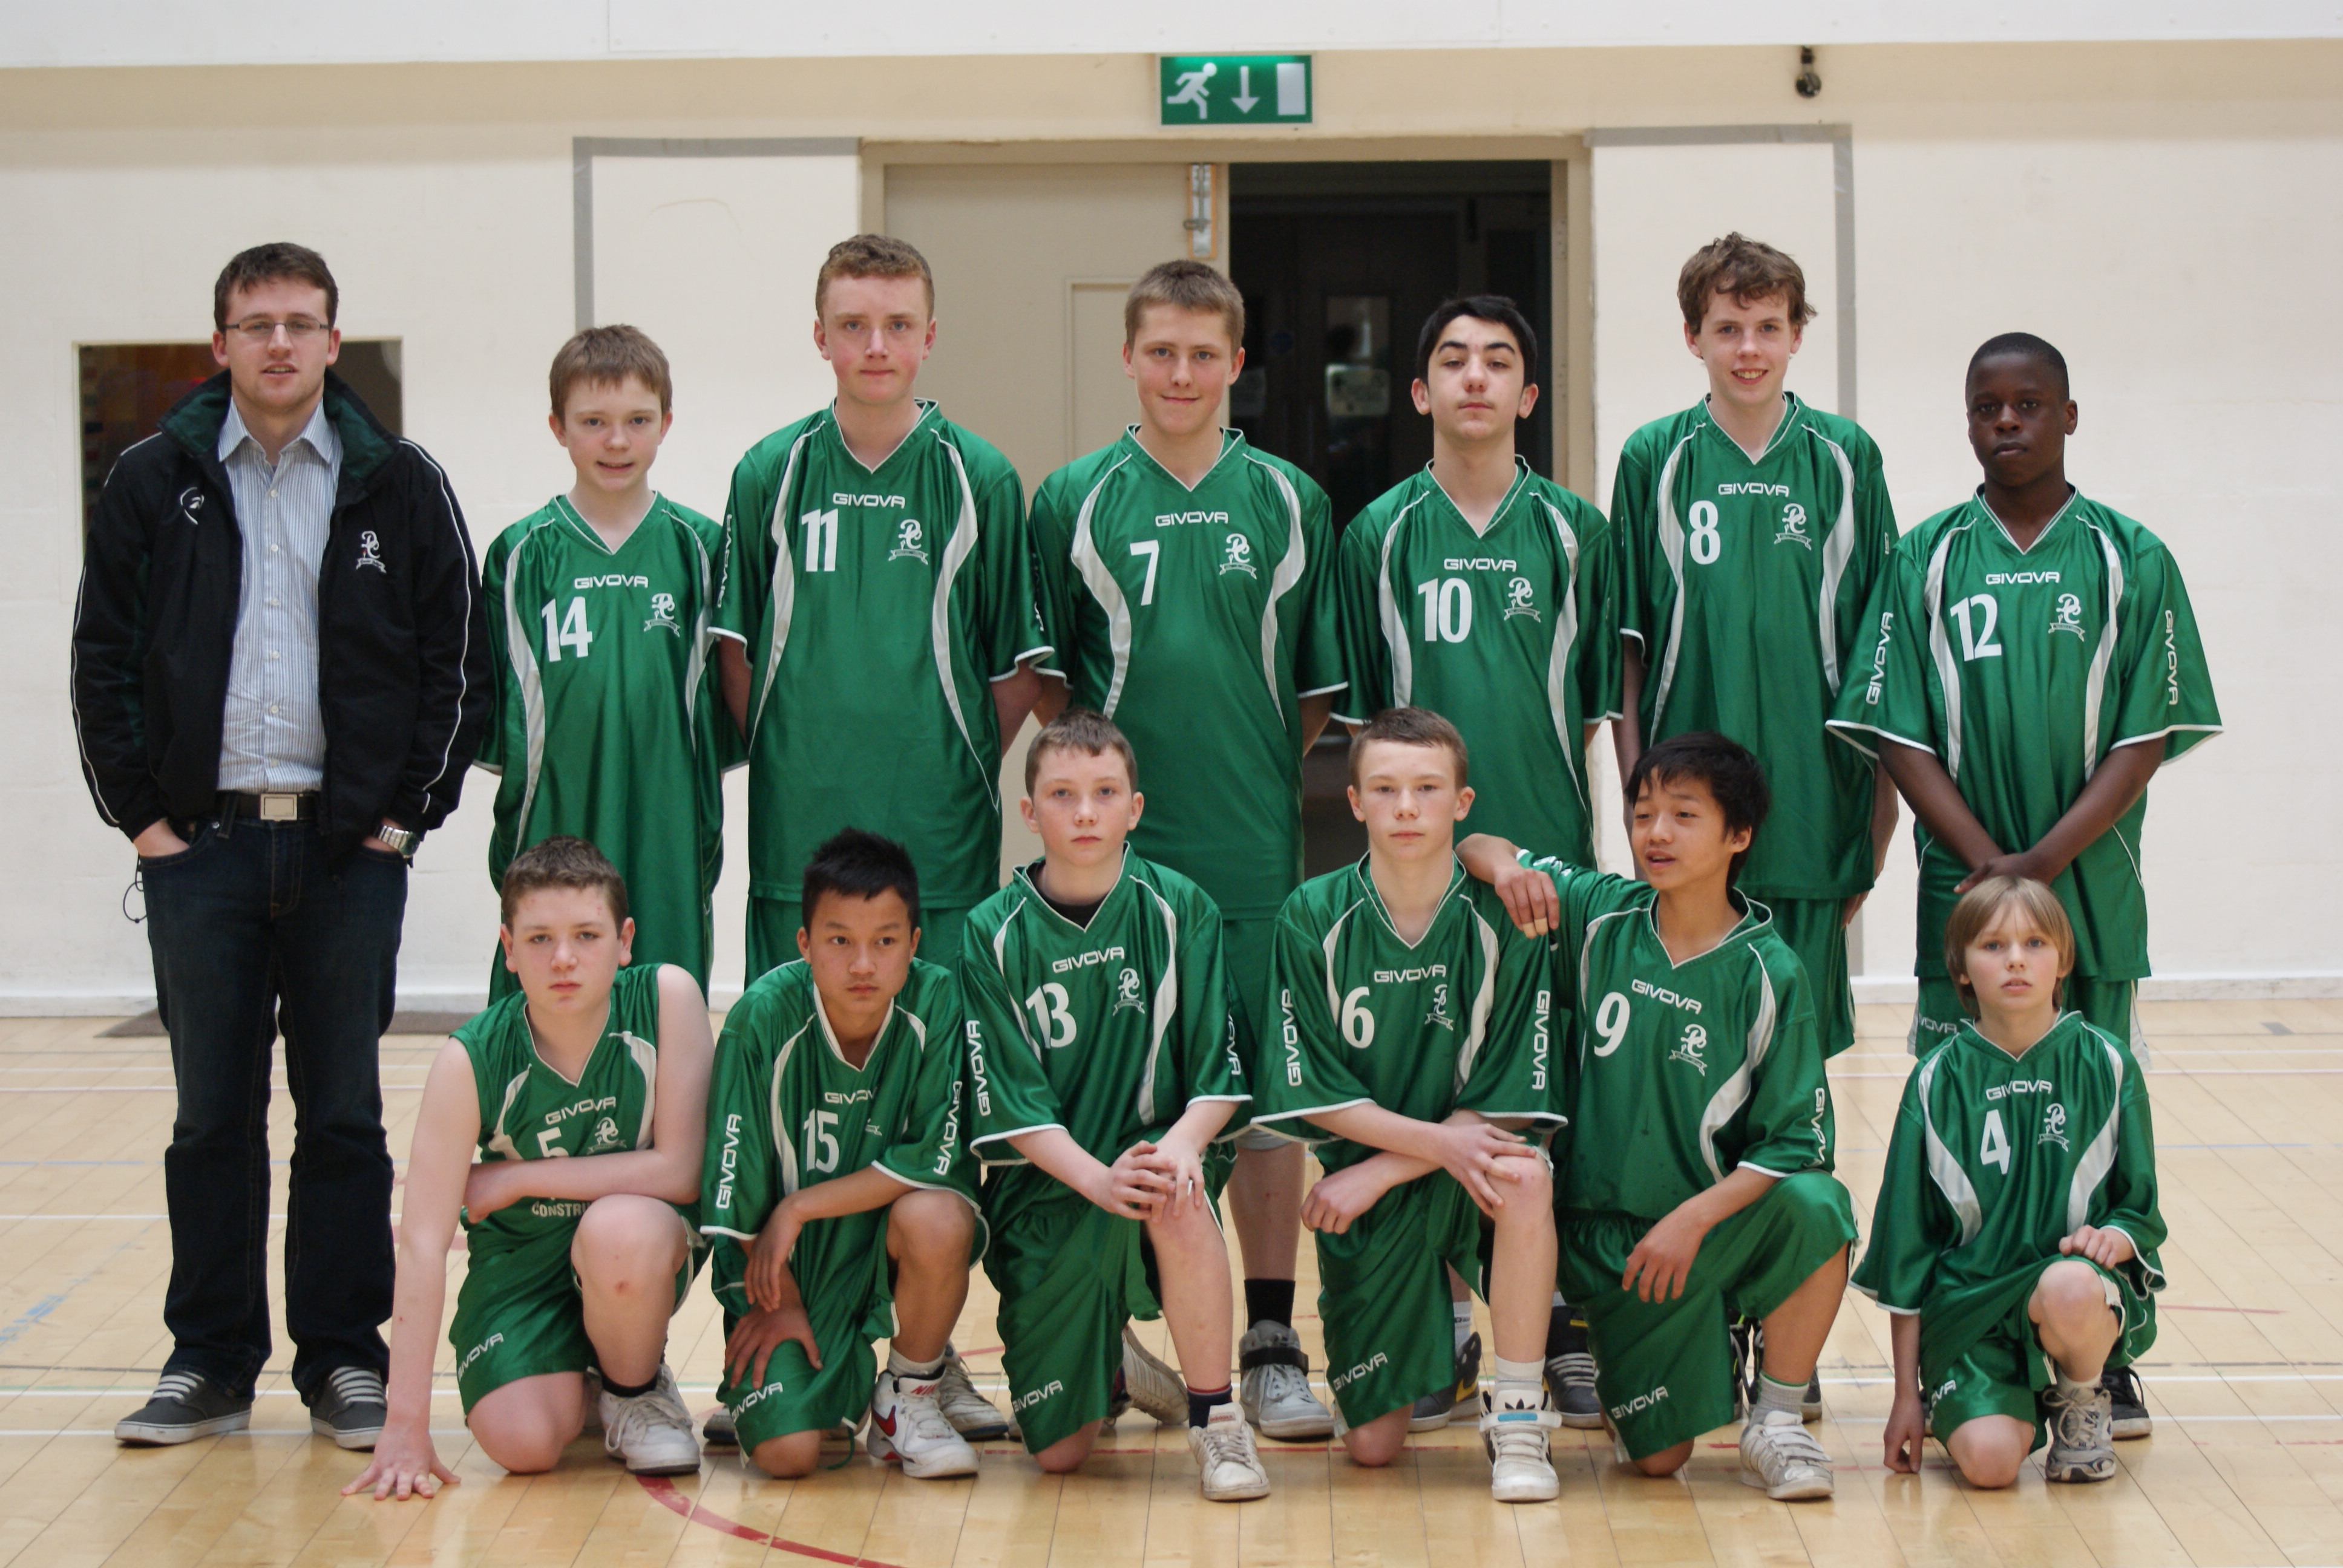 Pictured are the Davitt College, Castlebar first year boys basketball team who have reached the All-Ireland Semi-Finals in University of Limerick Sports Arena on 10th May 2013. Back Row (L-R): Mr. P.J McTavish (Coach), Liam McEllin, Ciaran Costello, Bartek Zalewski (Captain), Emil Samko, Eoin O'Malley, Joshua Awodibu. Front Row (L-R): James Kennedy, Bah So, Noel Geraghty, James Finnerty, Ler Lah, Dónal Parkinson